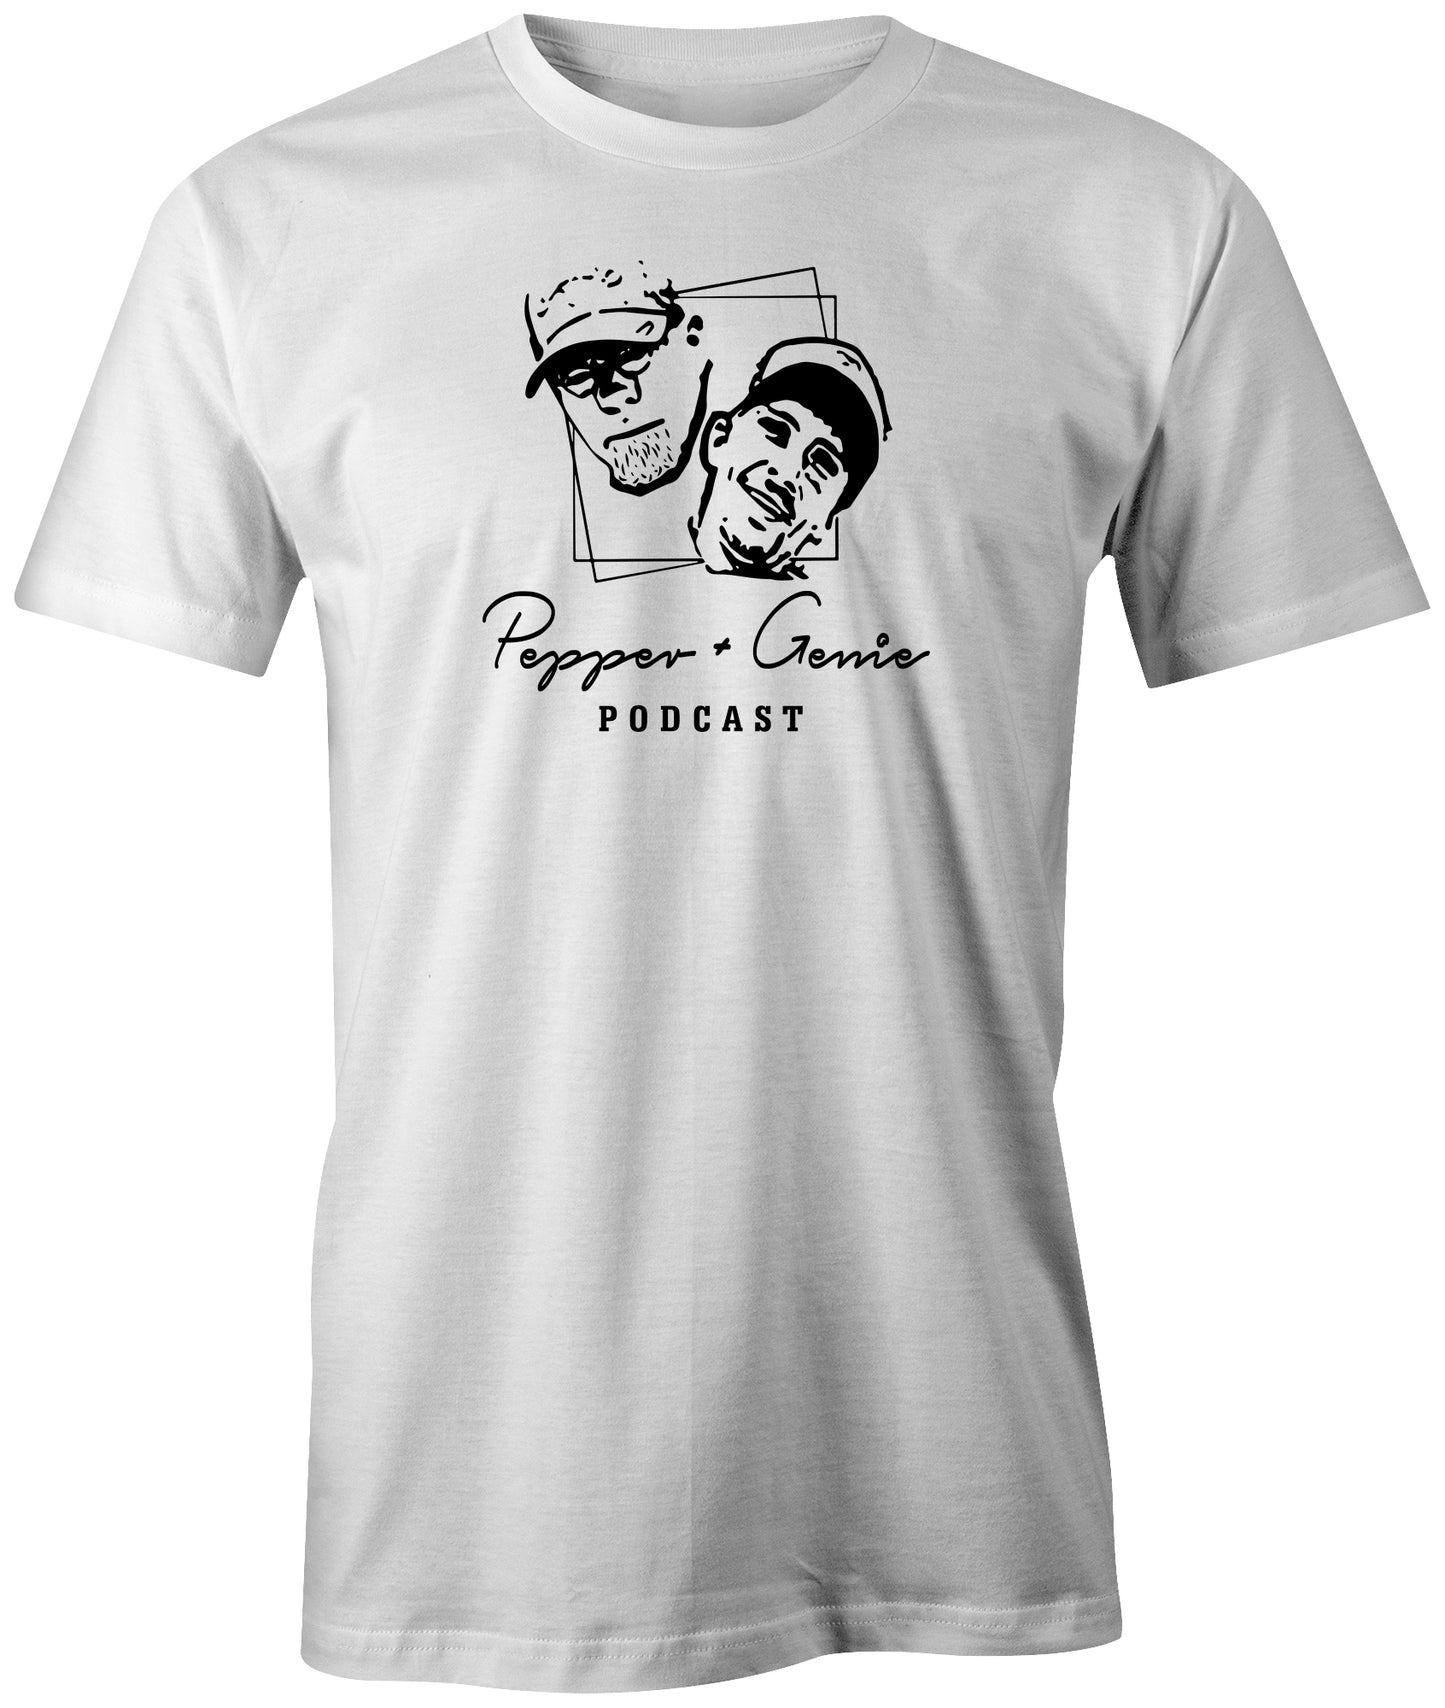 Show your support for the Pepper n Geanie Podcast with this stylish tee! 3 letters, 3 hours of fun. Represent your favorite morning show in this classic TMA t-shirt. Available in several colors to wet your whistle. tim doug iggy jackson plowsy